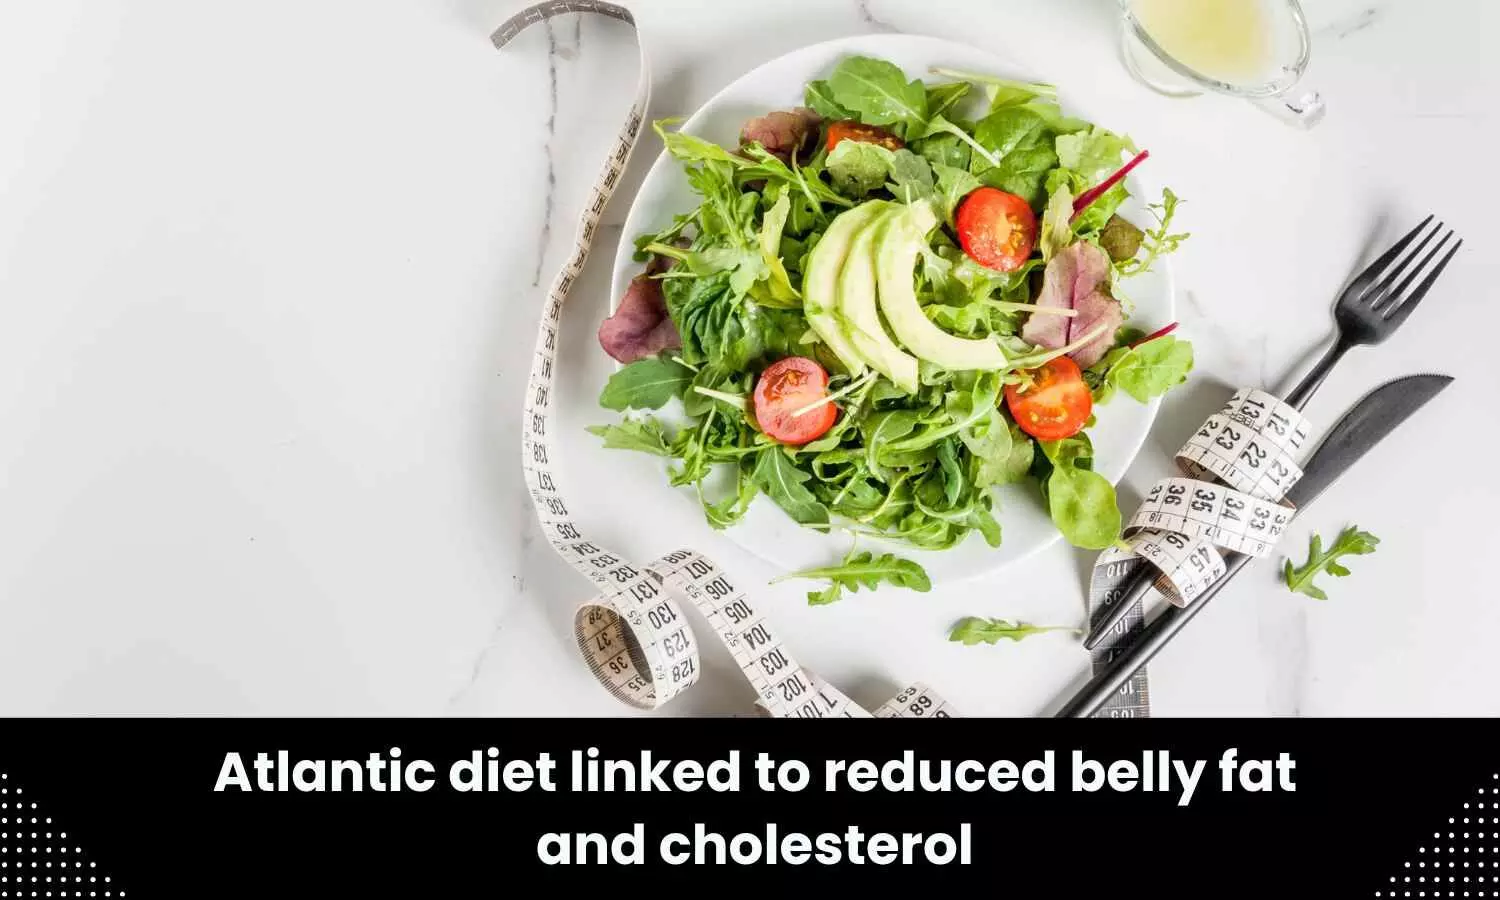 Atlantic diet linked to reduced cholesterol, belly fat: Study